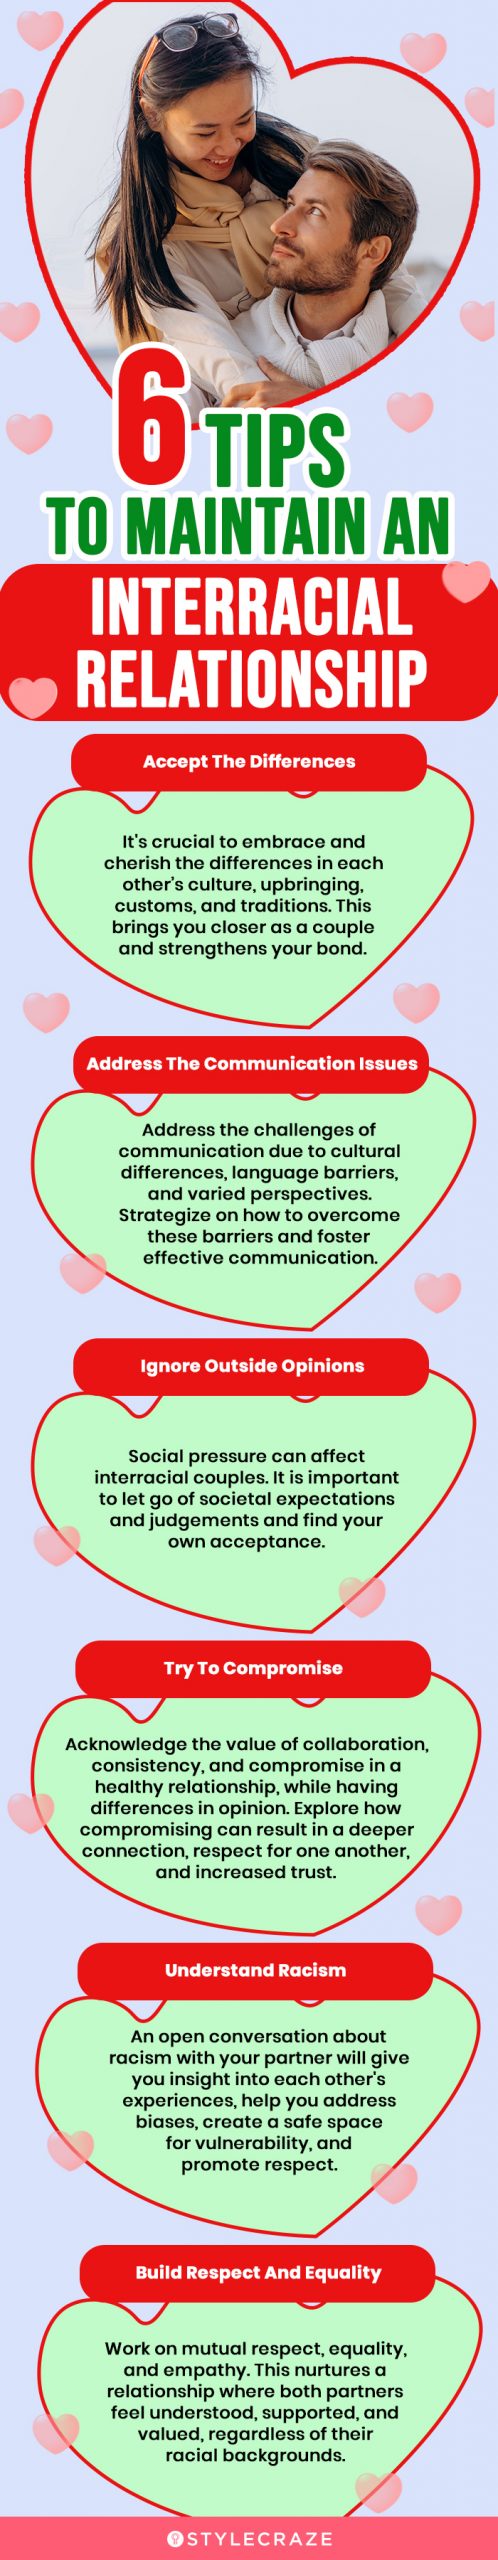 6 tips to maintain an interracial relationship (infographic)